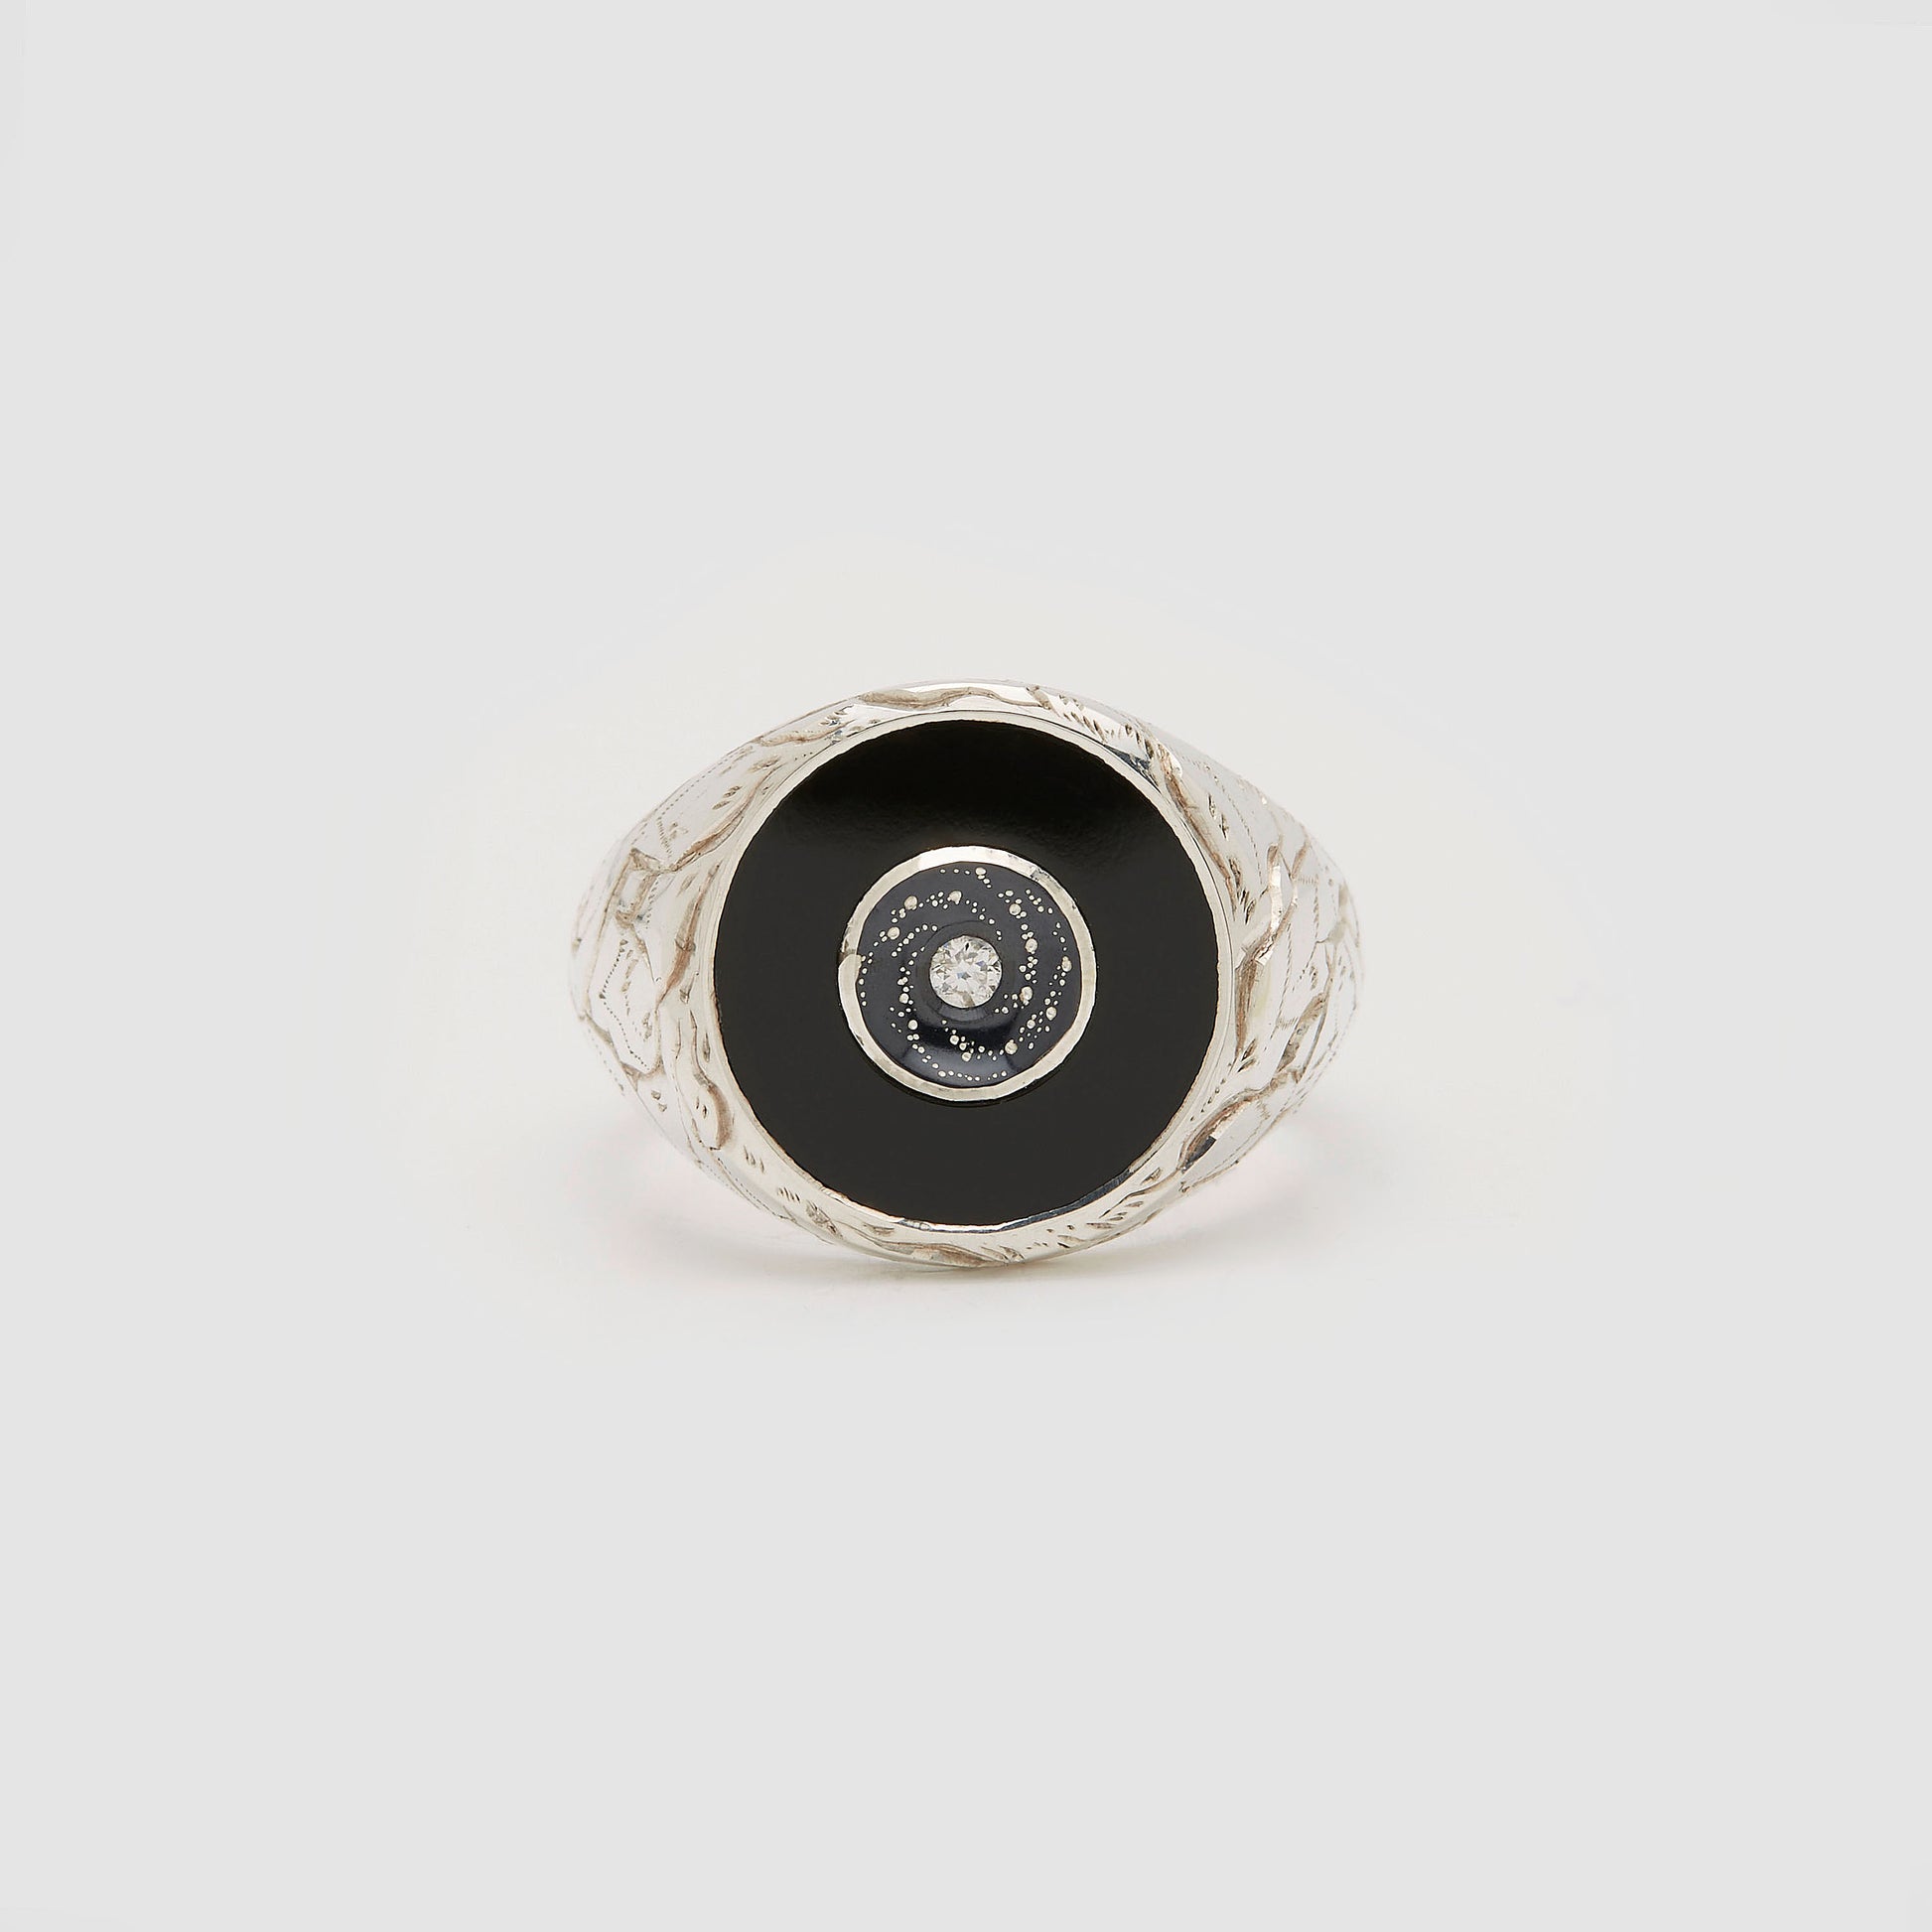 Castro Smith Jewelry Silver Oubliette Signet Ring with Onyx Around a Concave Galaxy with a Centre Diamond in Profile View.